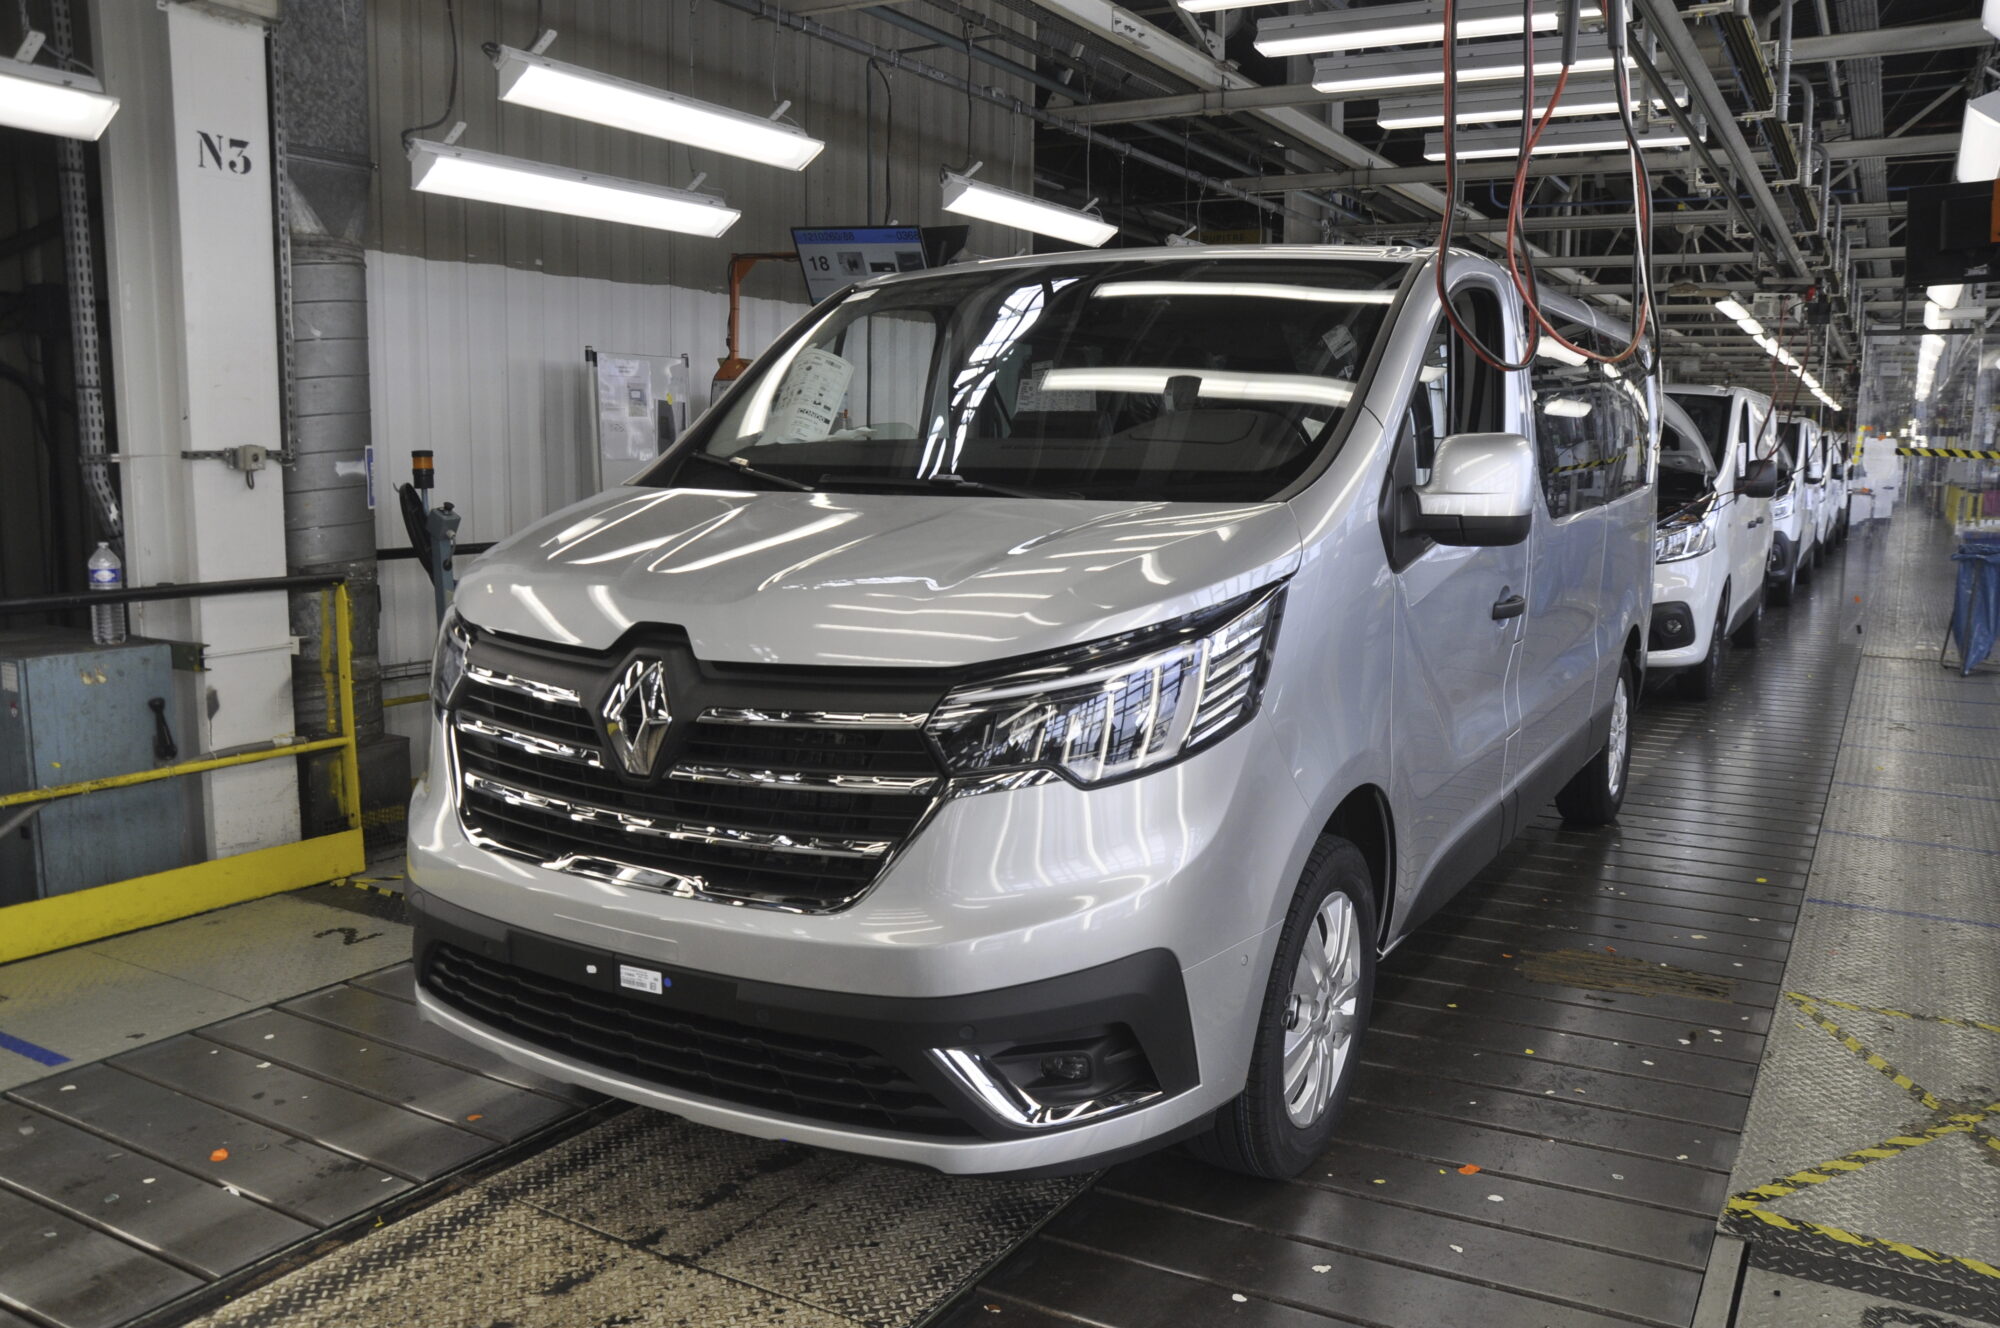 2021 - New Renault Trafic - Manufacturing